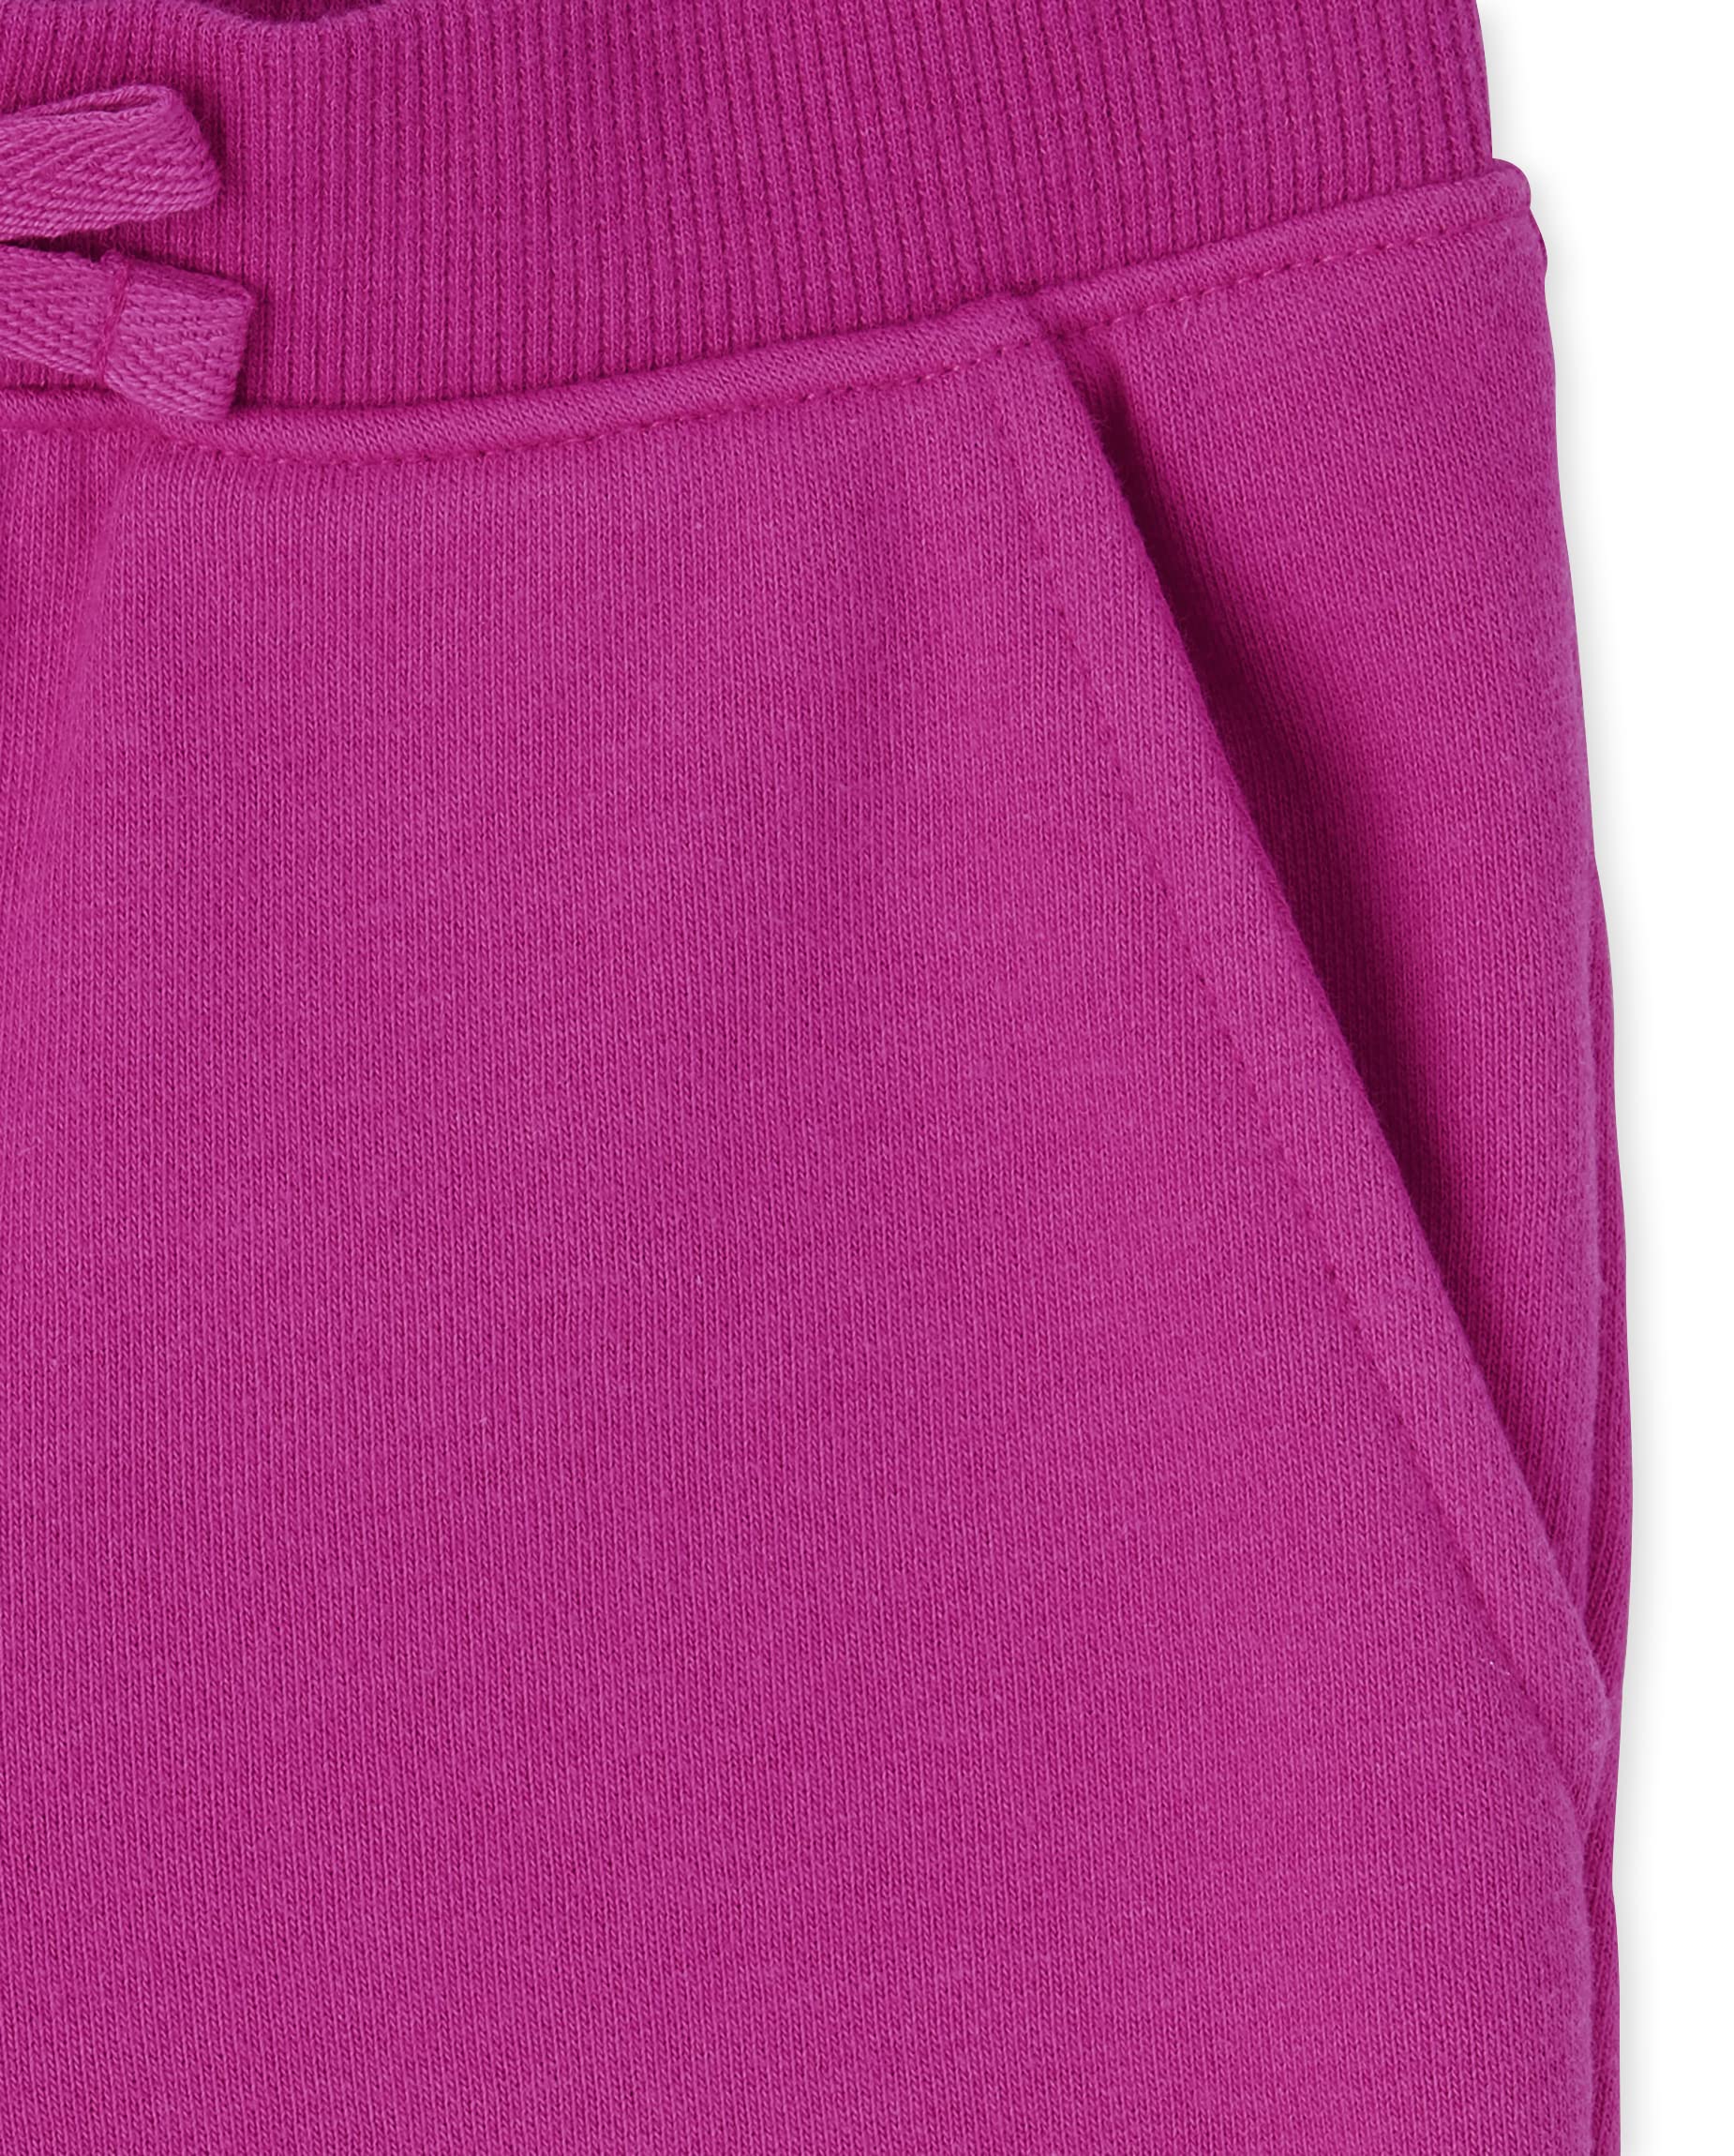 The Children's Place Girls' Active French Terry Shorts